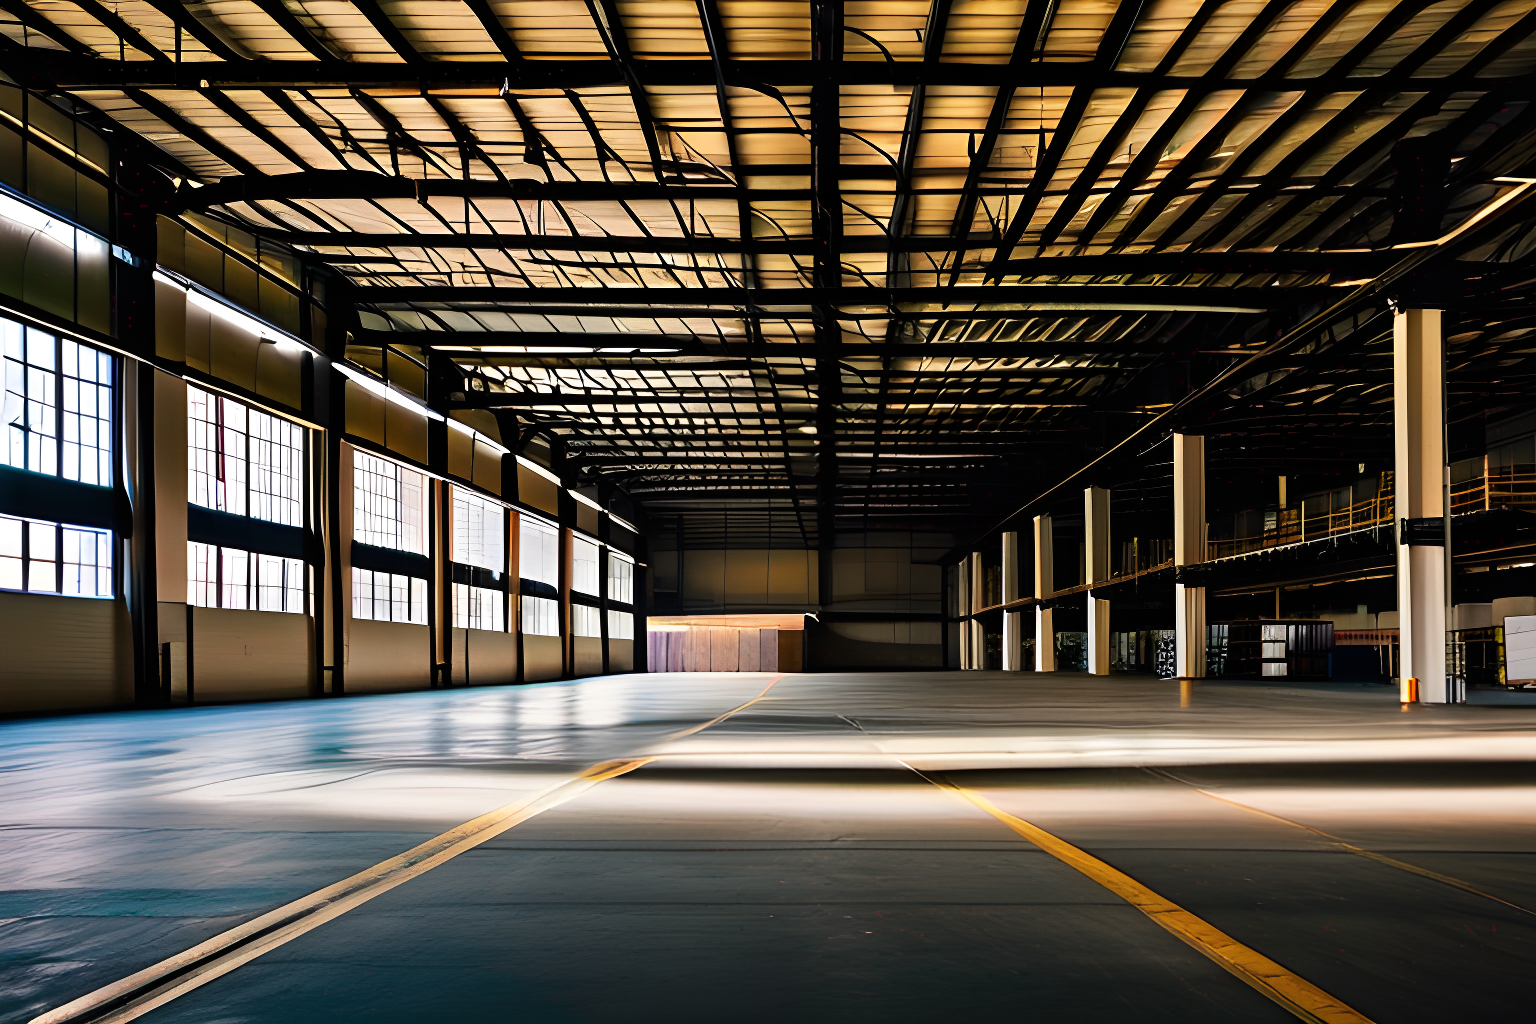 Breathtaking photograph of a warehouse